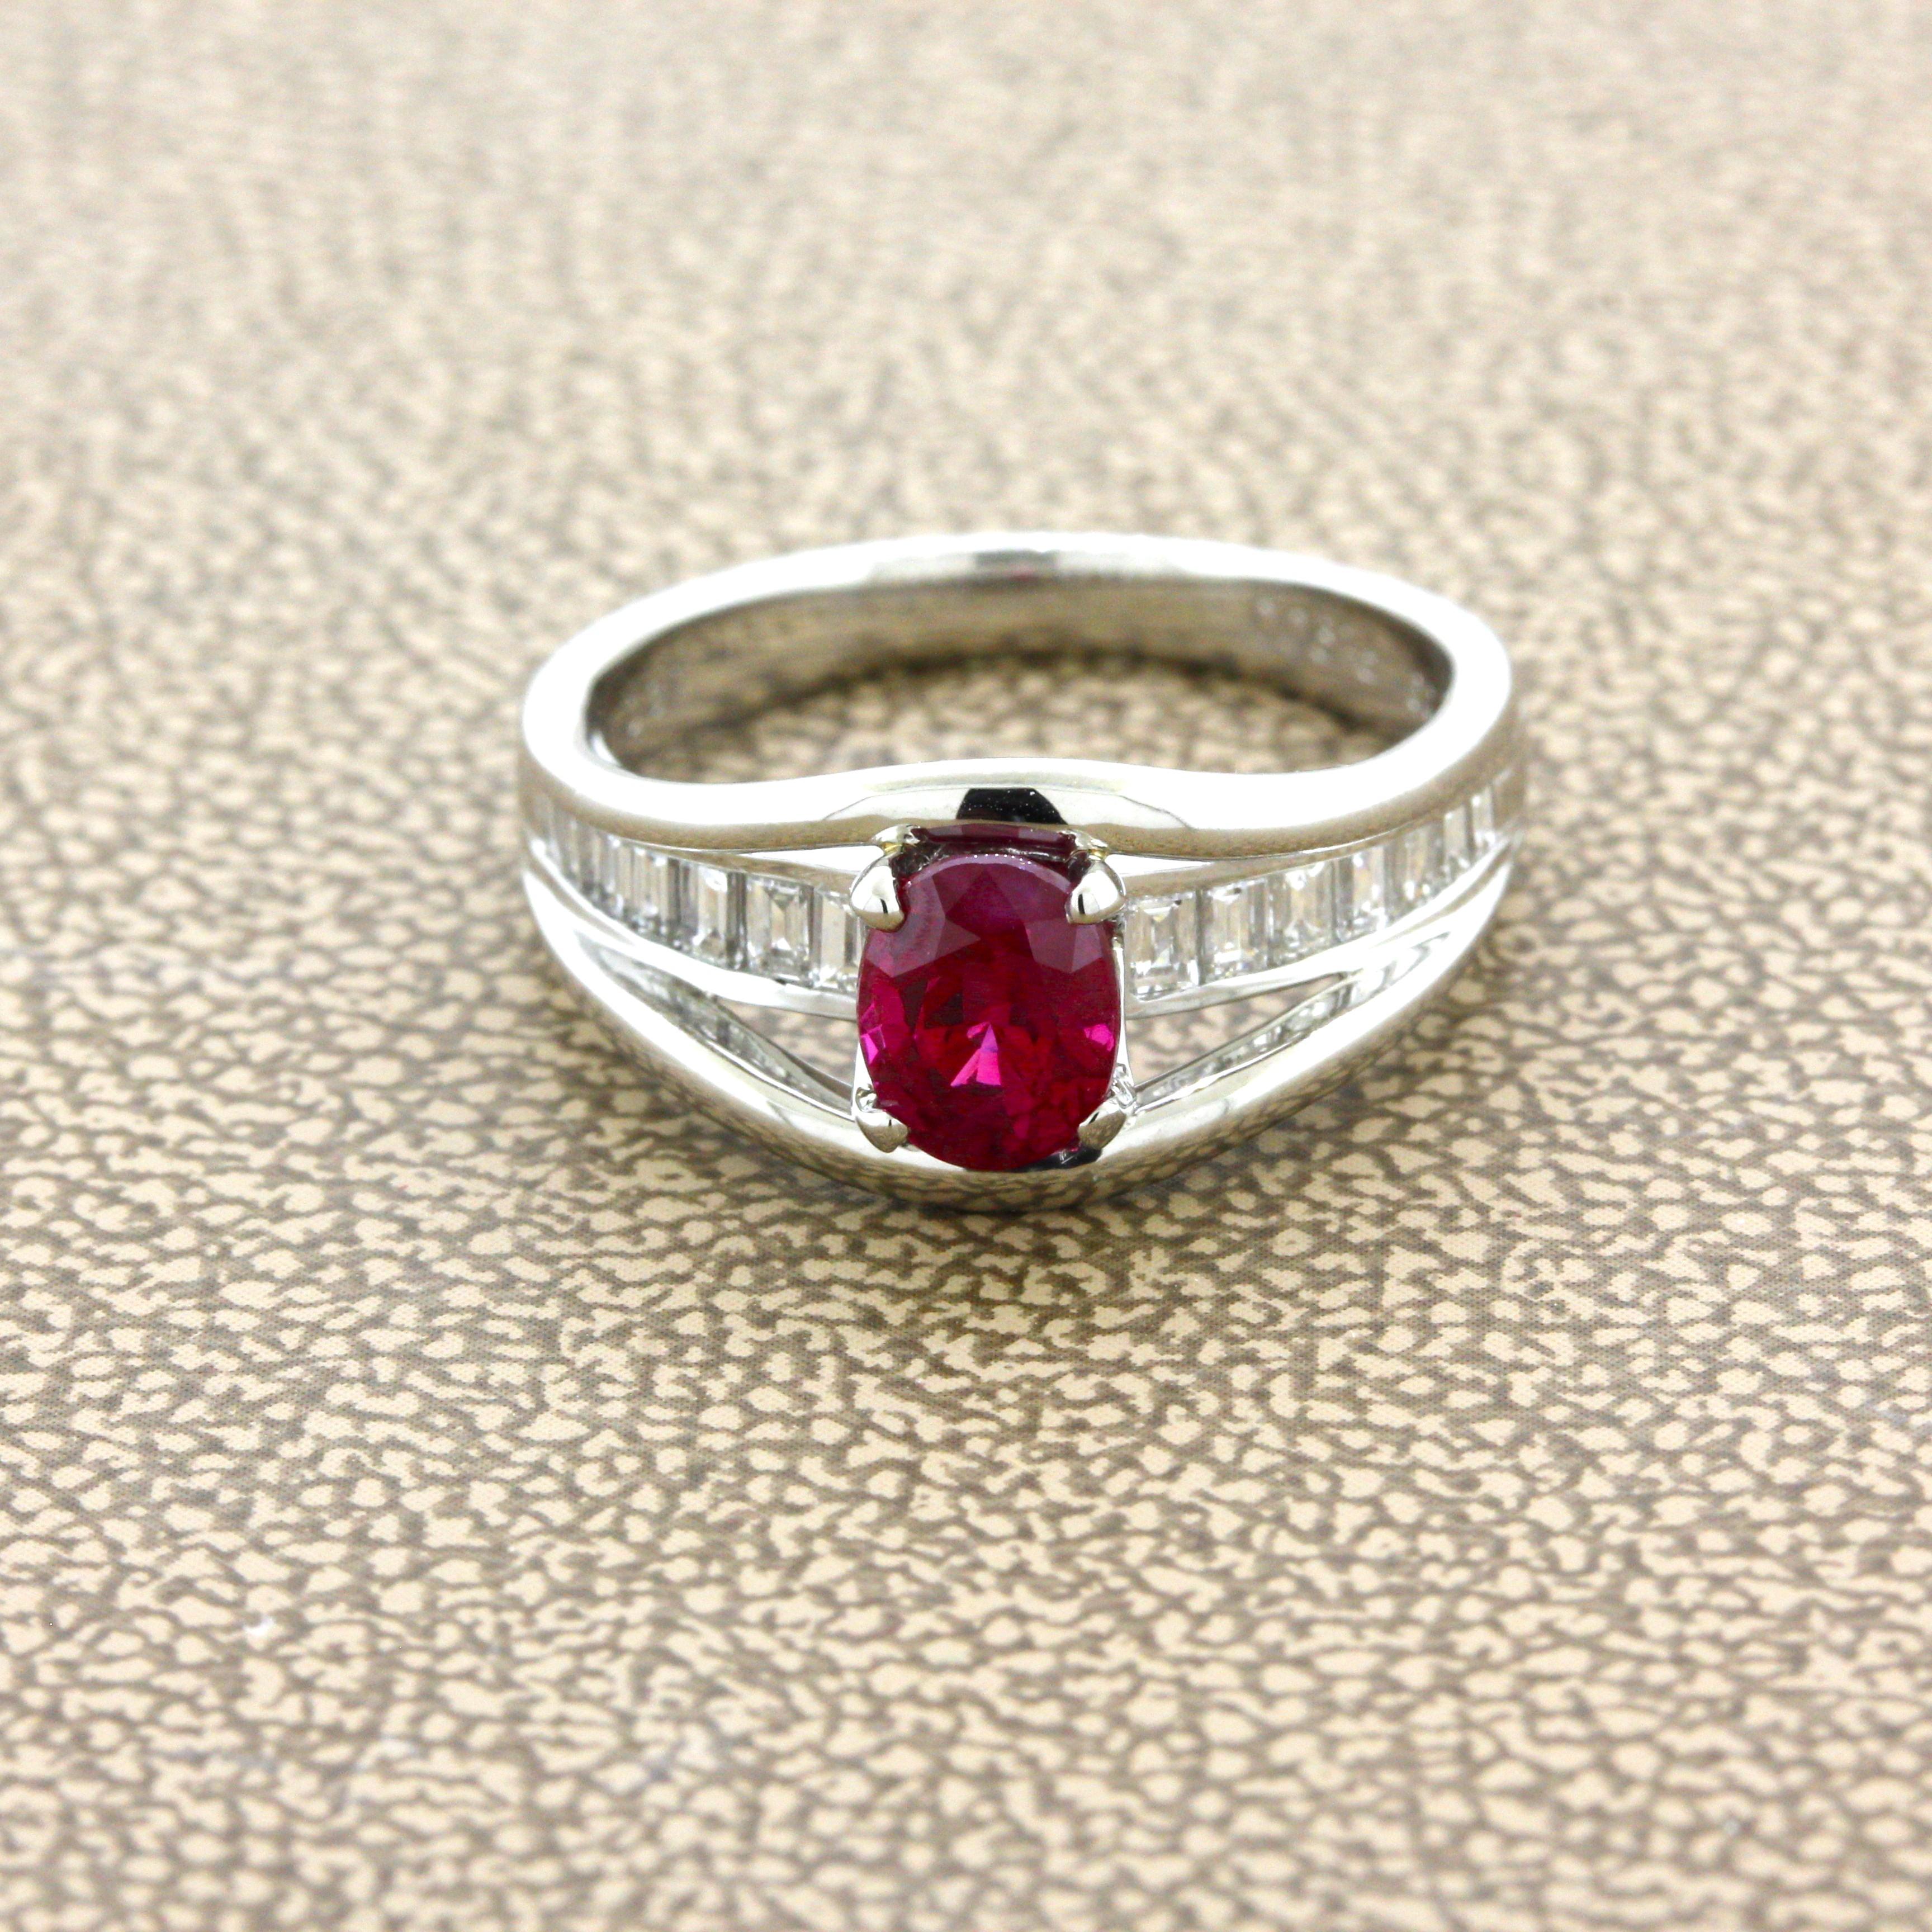 A sweet and luscious 1.09 carat Burmese ruby takes center stage! It has an intense and vibrant red color which is certified by the GIA as natural with a Burmese origin. It is complemented by 0.31 carats of baguette-cut diamonds which are channel-set